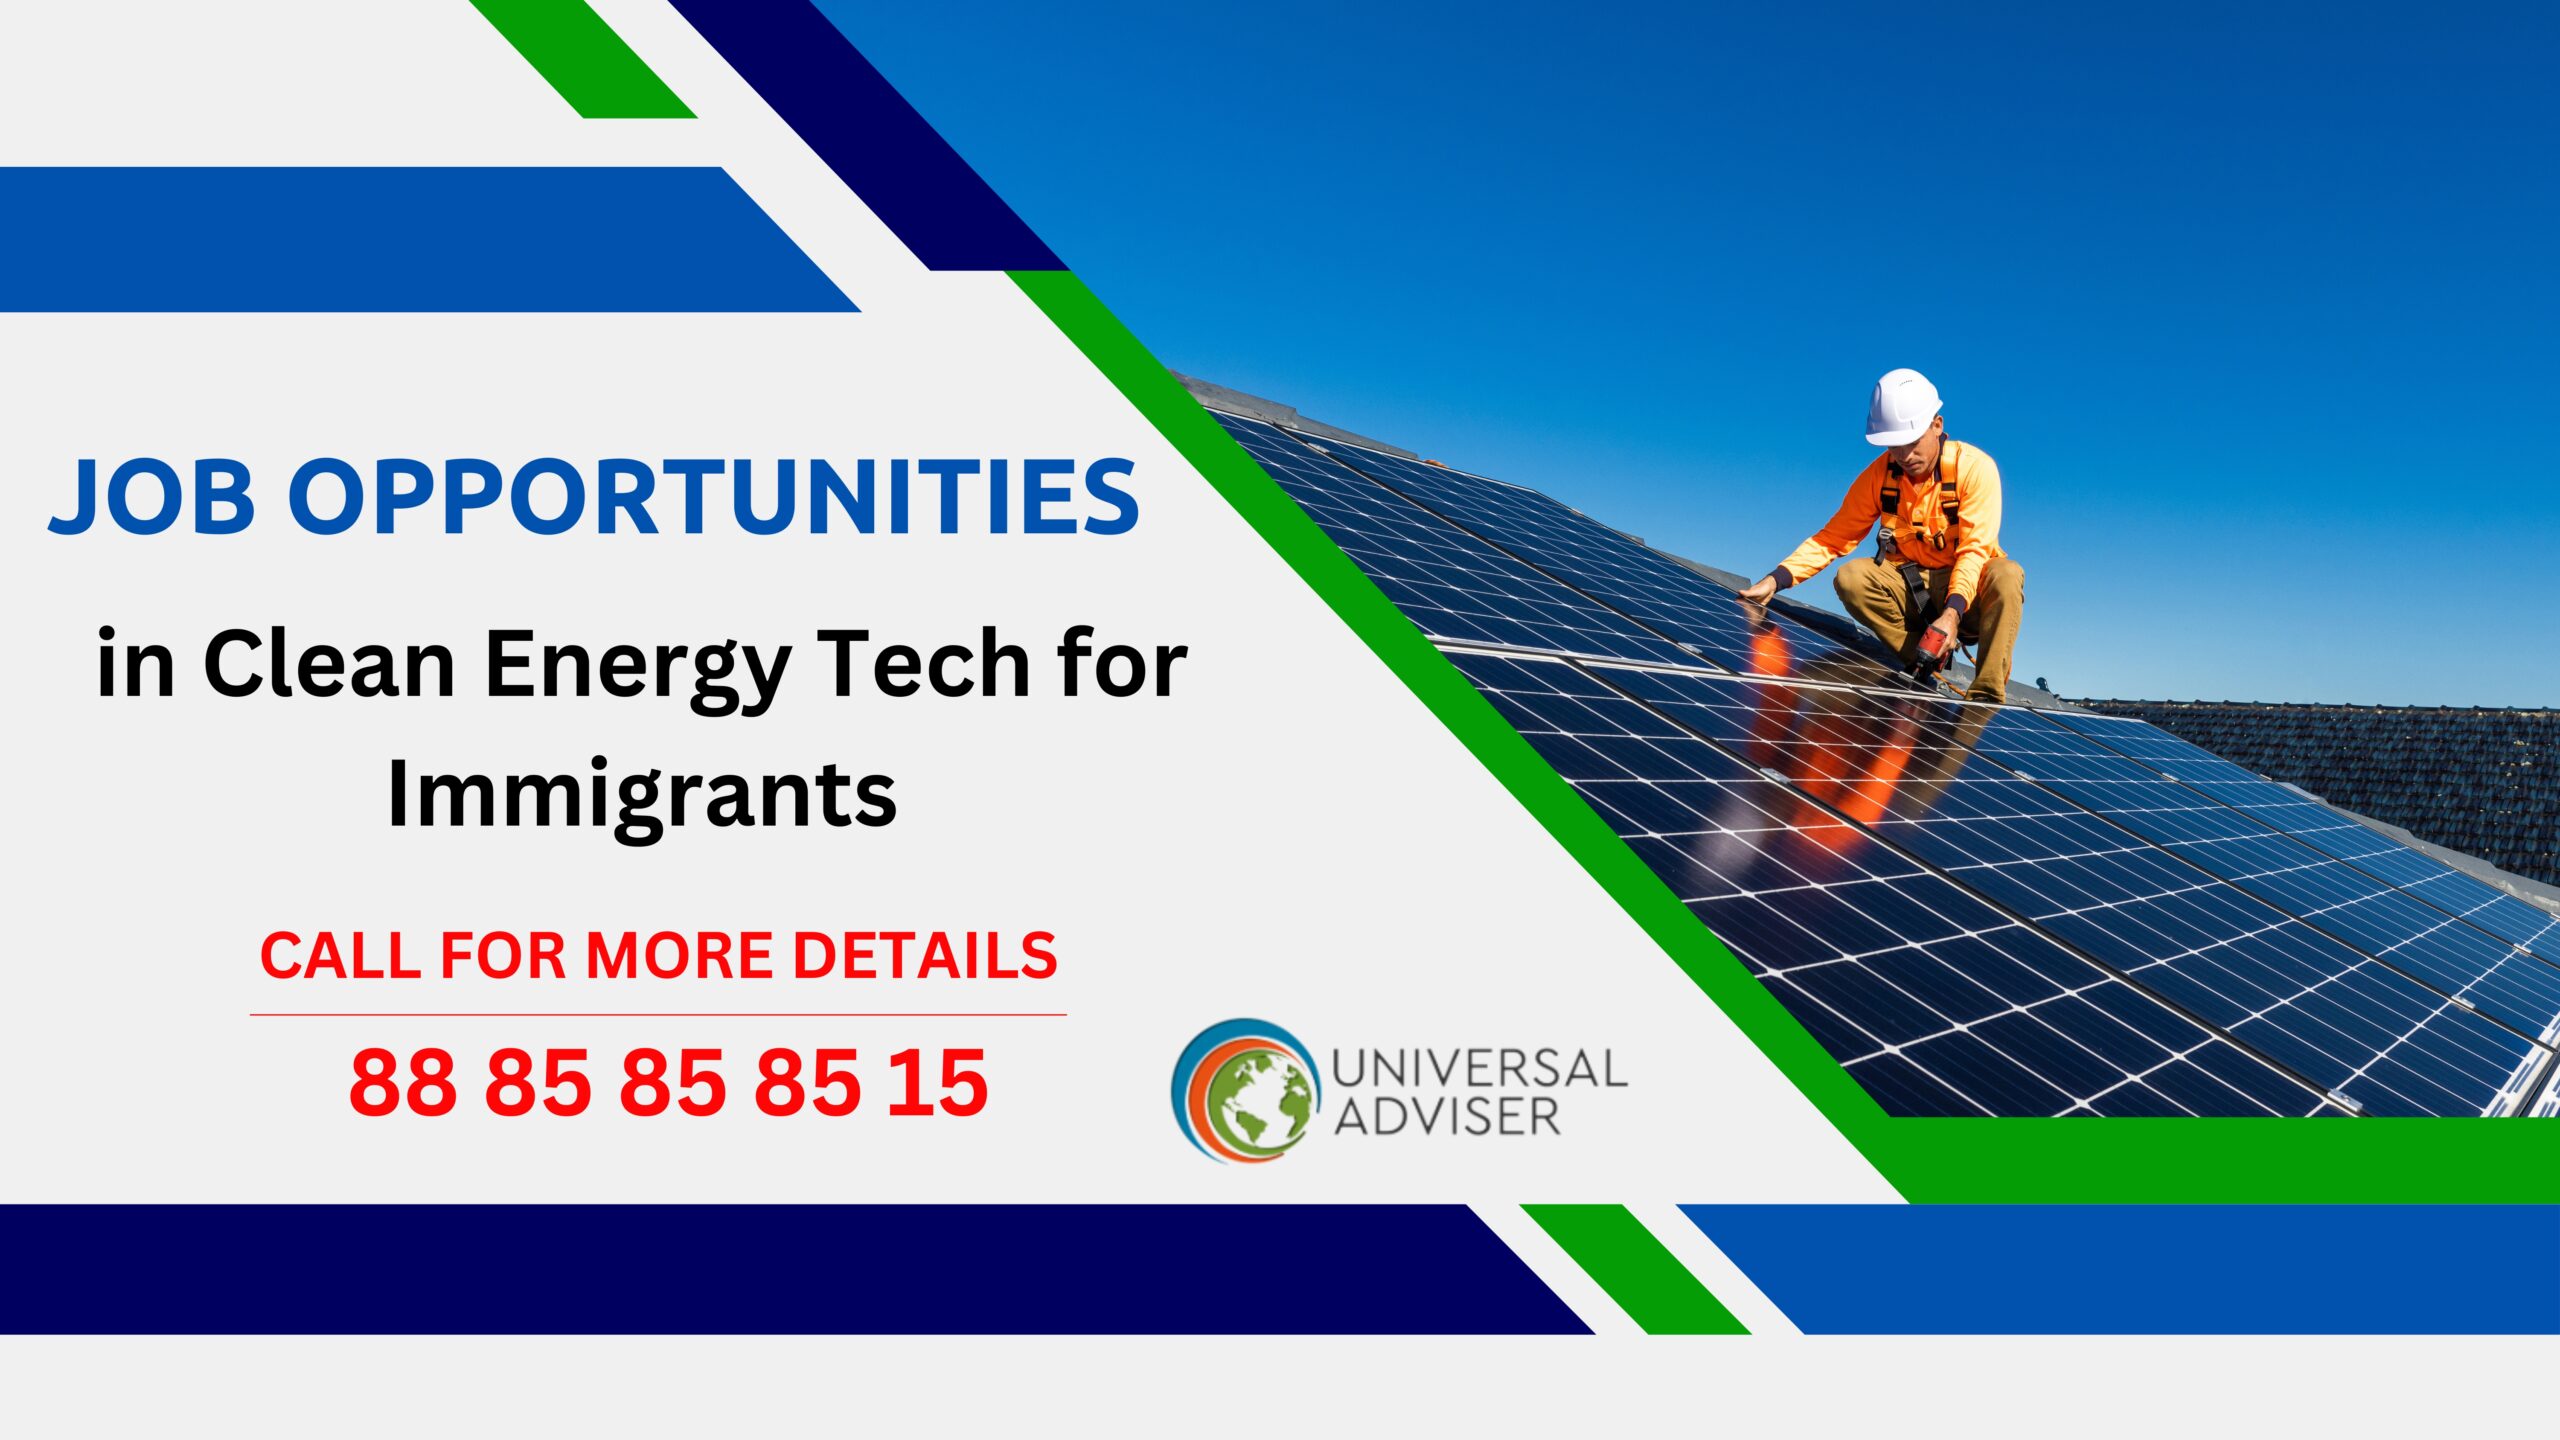 Job Opportunities in Clean Energy Tech for Immigrants